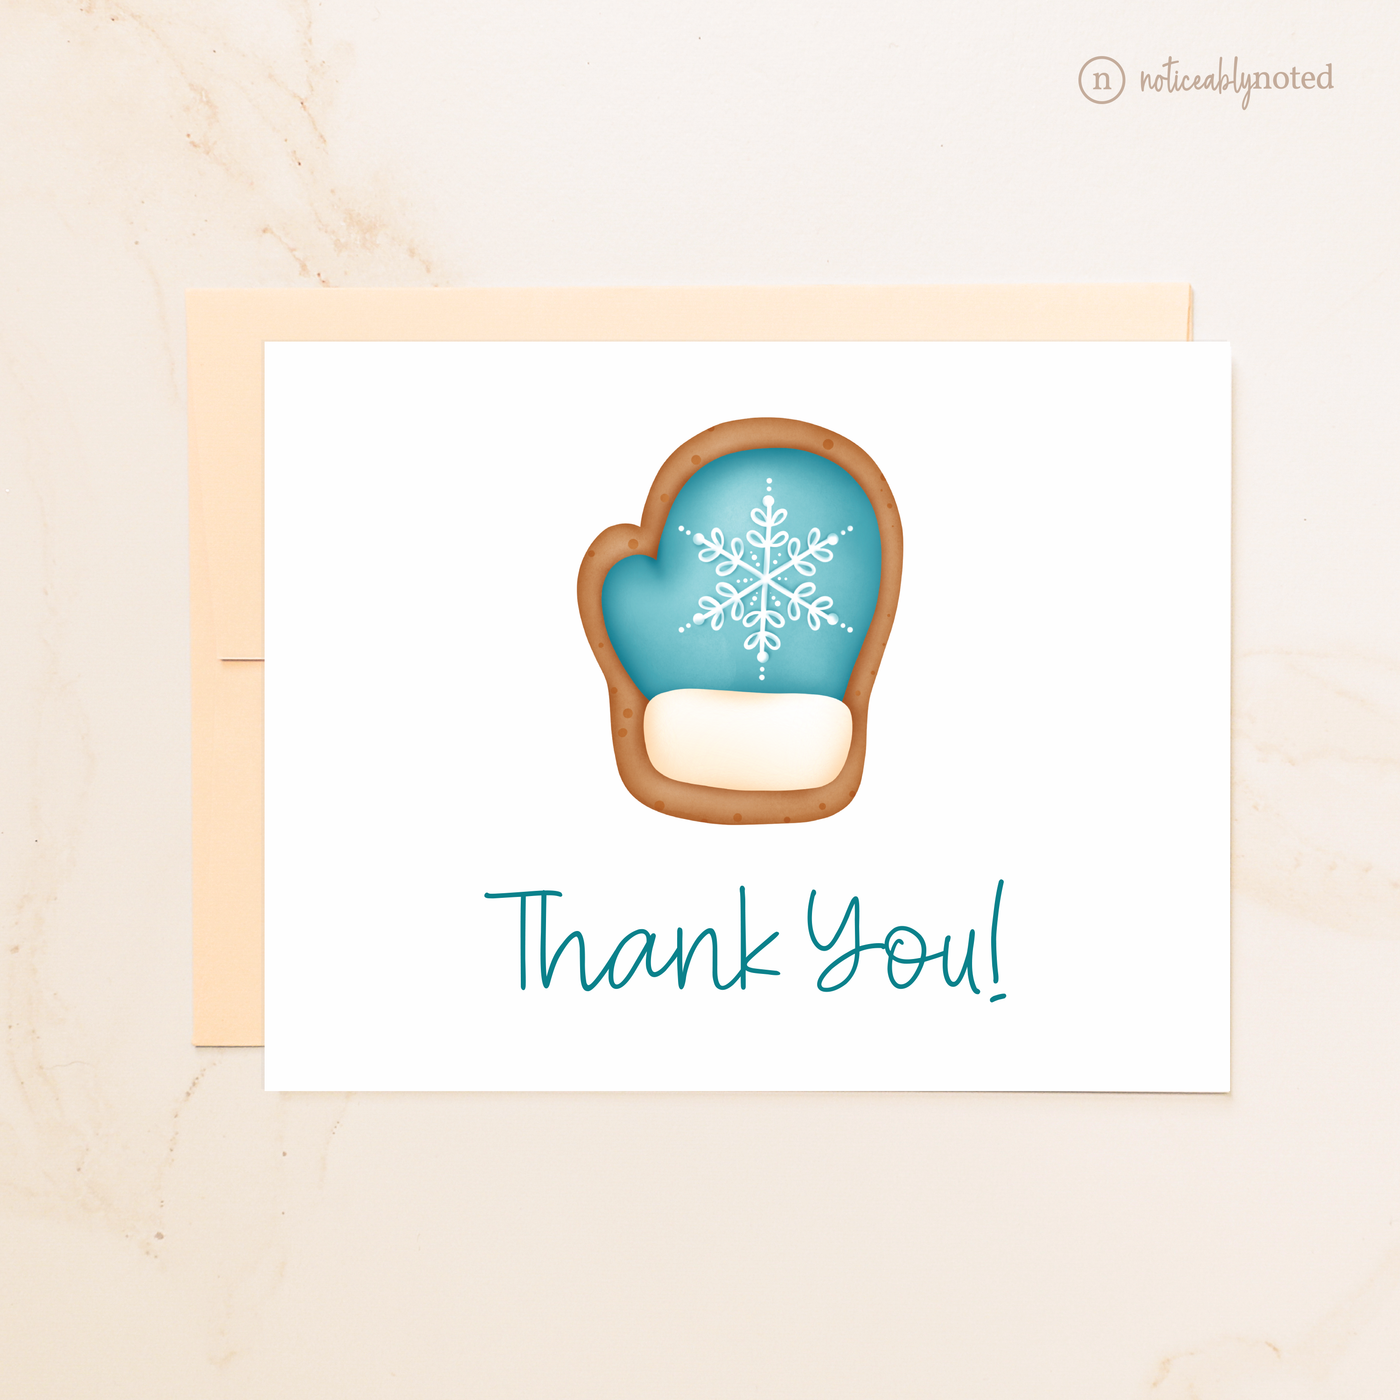 Mitten Cookie Folded Thank You Cards | Noticeably Noted